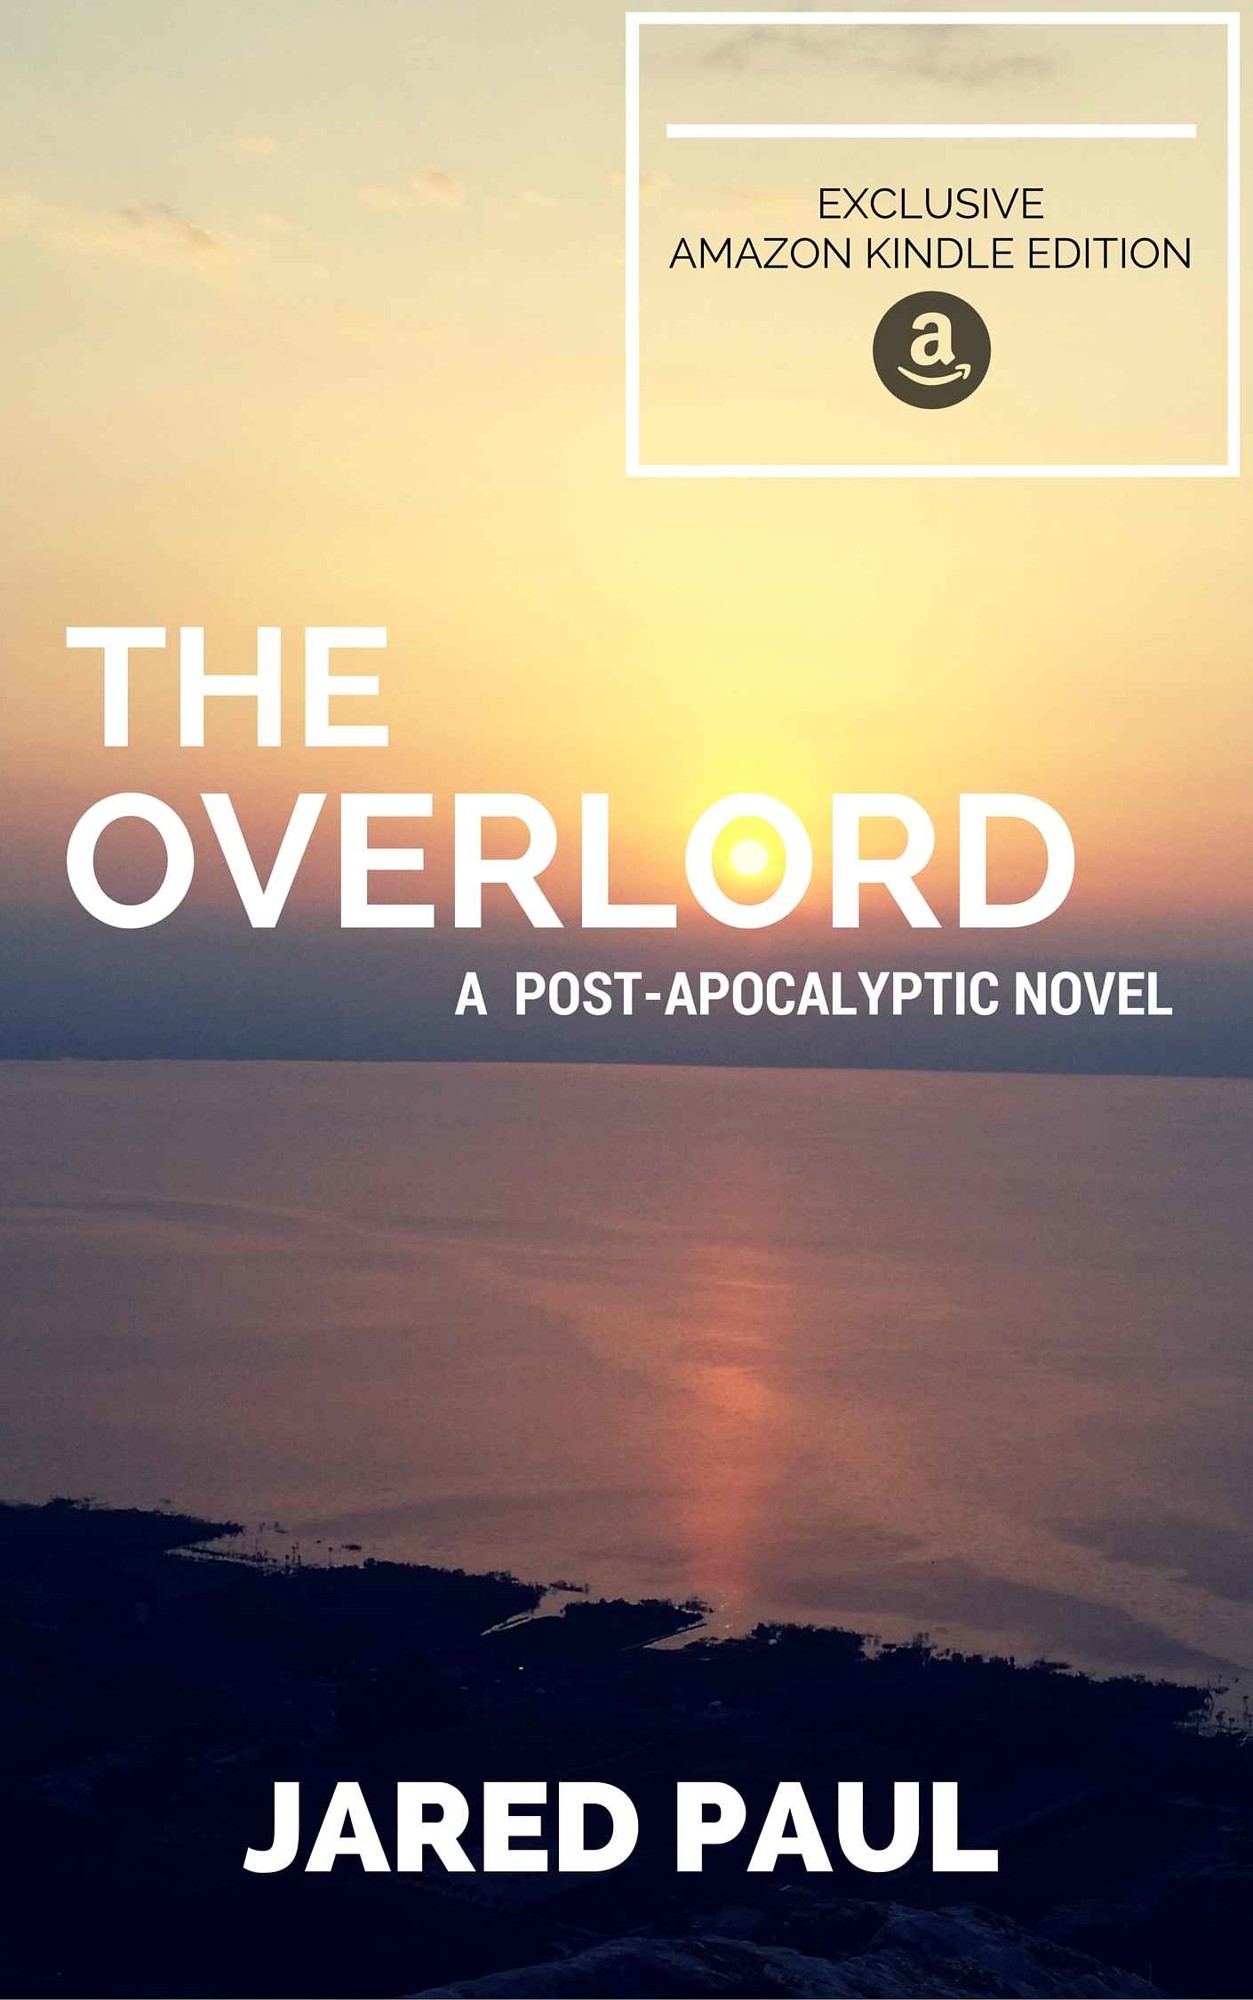 The Overlord: A Post-Apocalyptic Novel